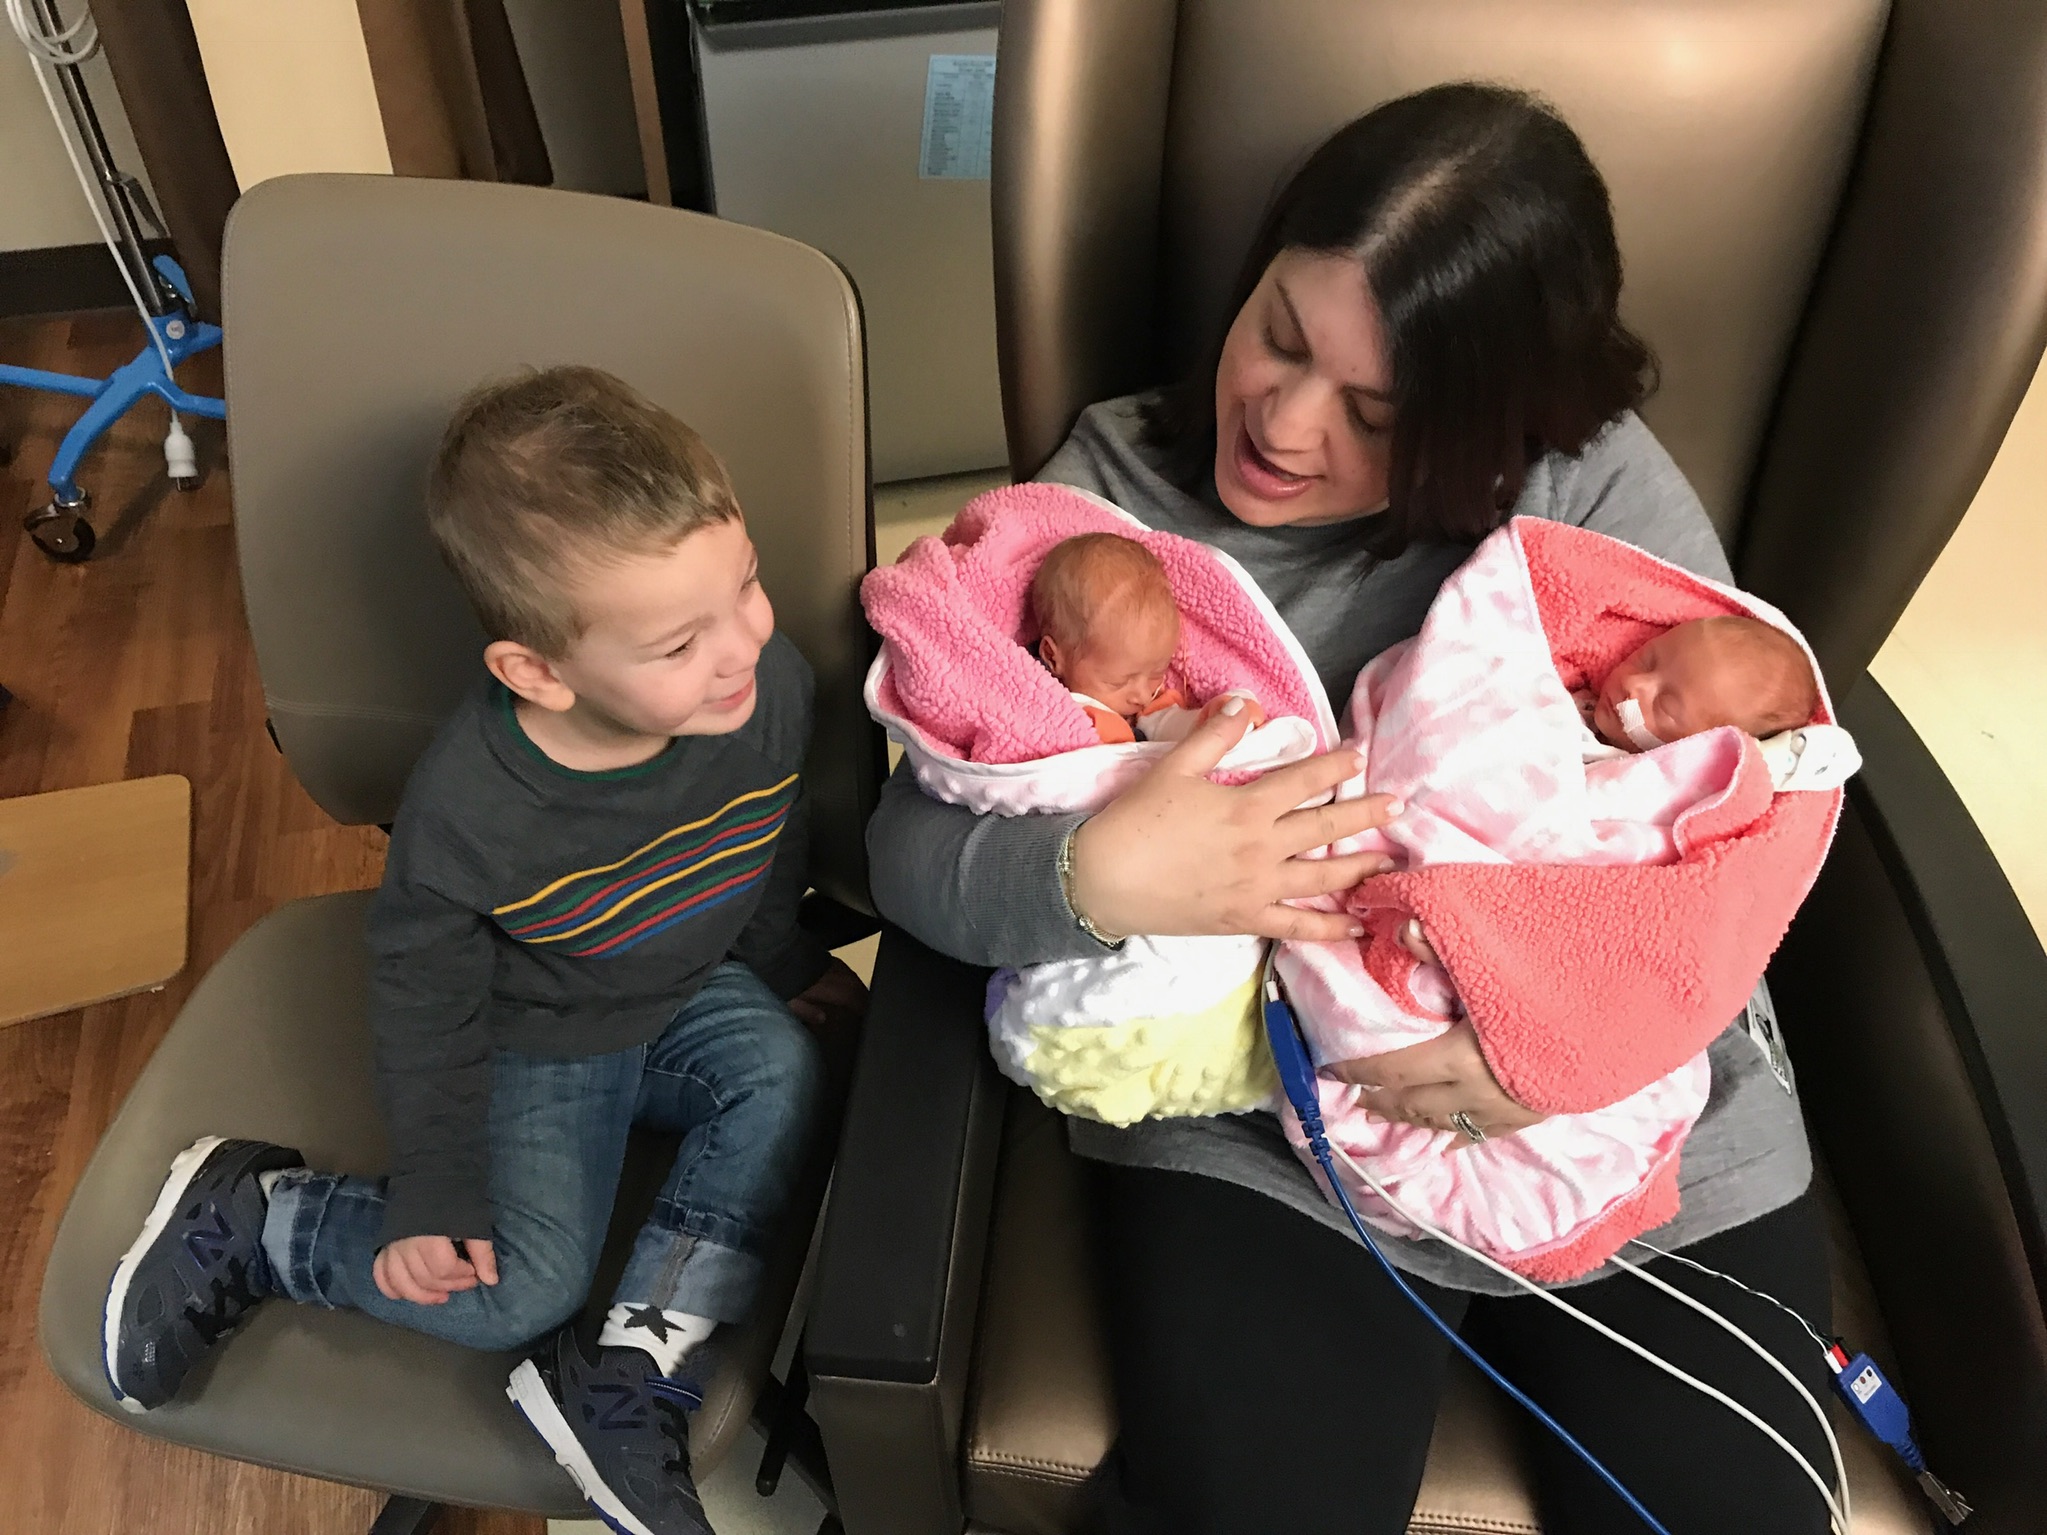 Ross meeting his sisters for the first time.